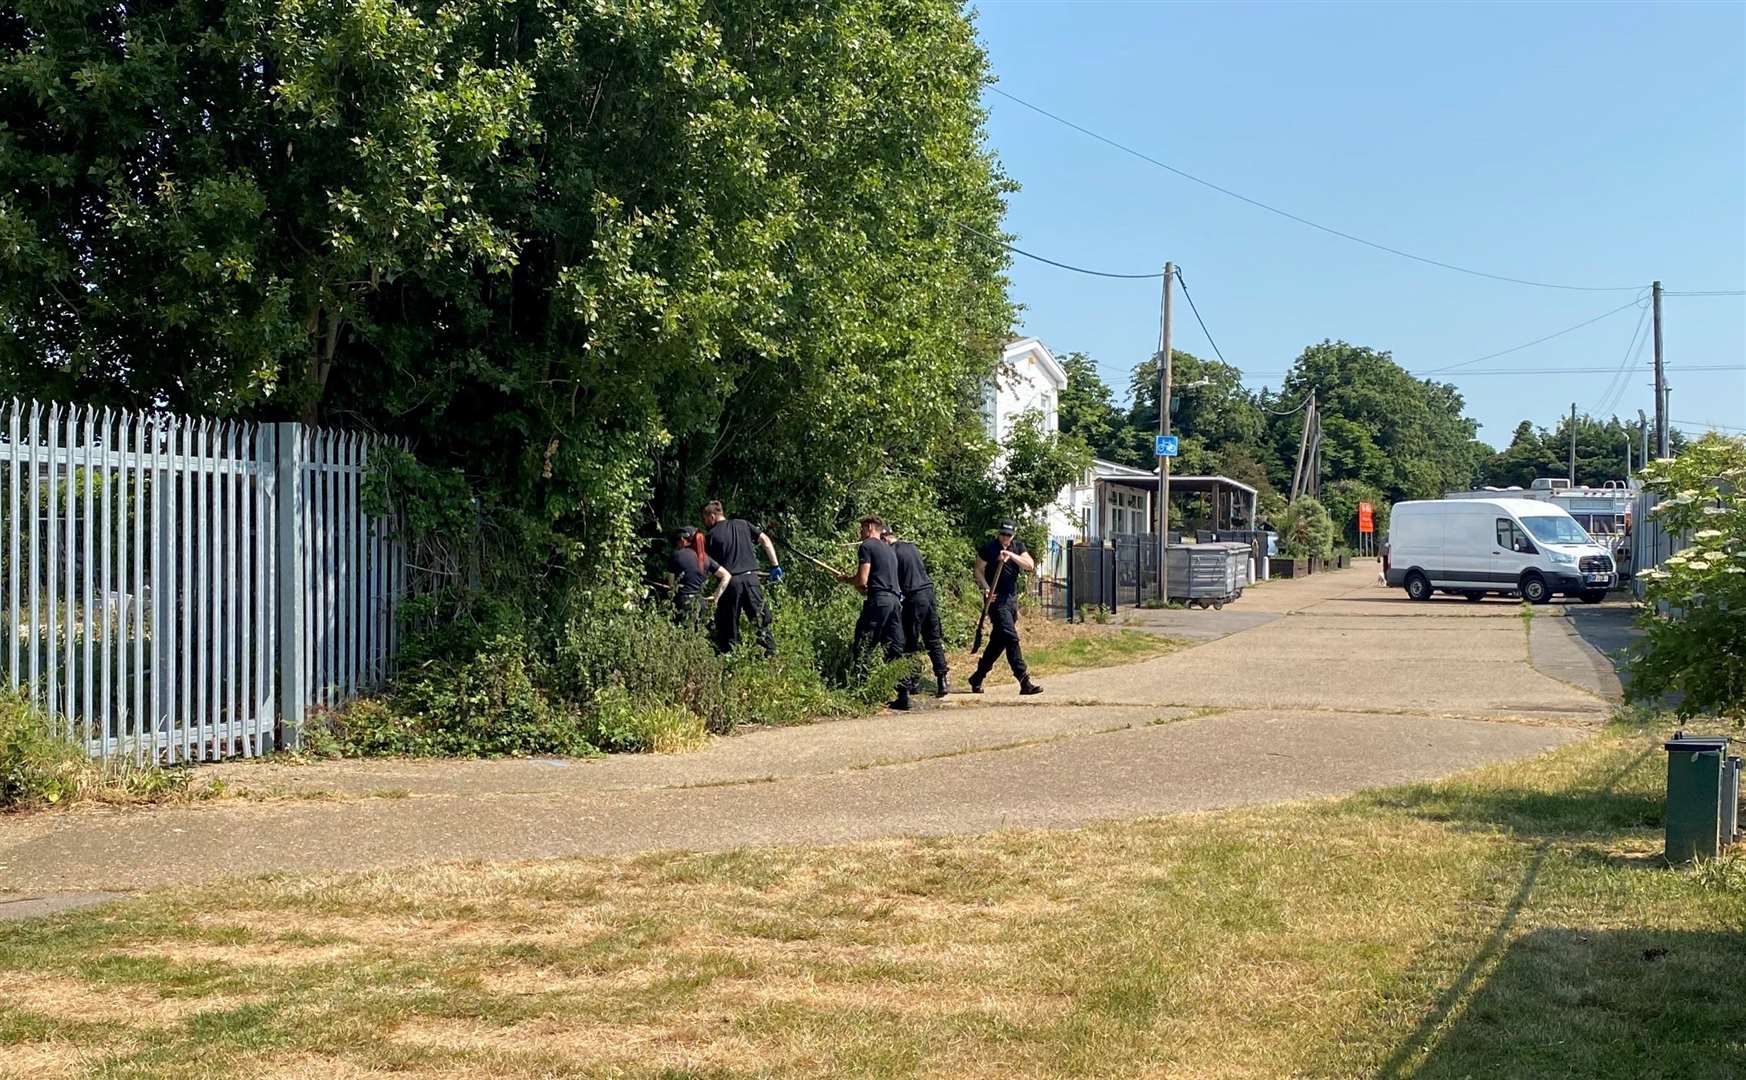 Police were spotted near Eastchurch Holiday Centre in Fourth Avenue, Sheppey